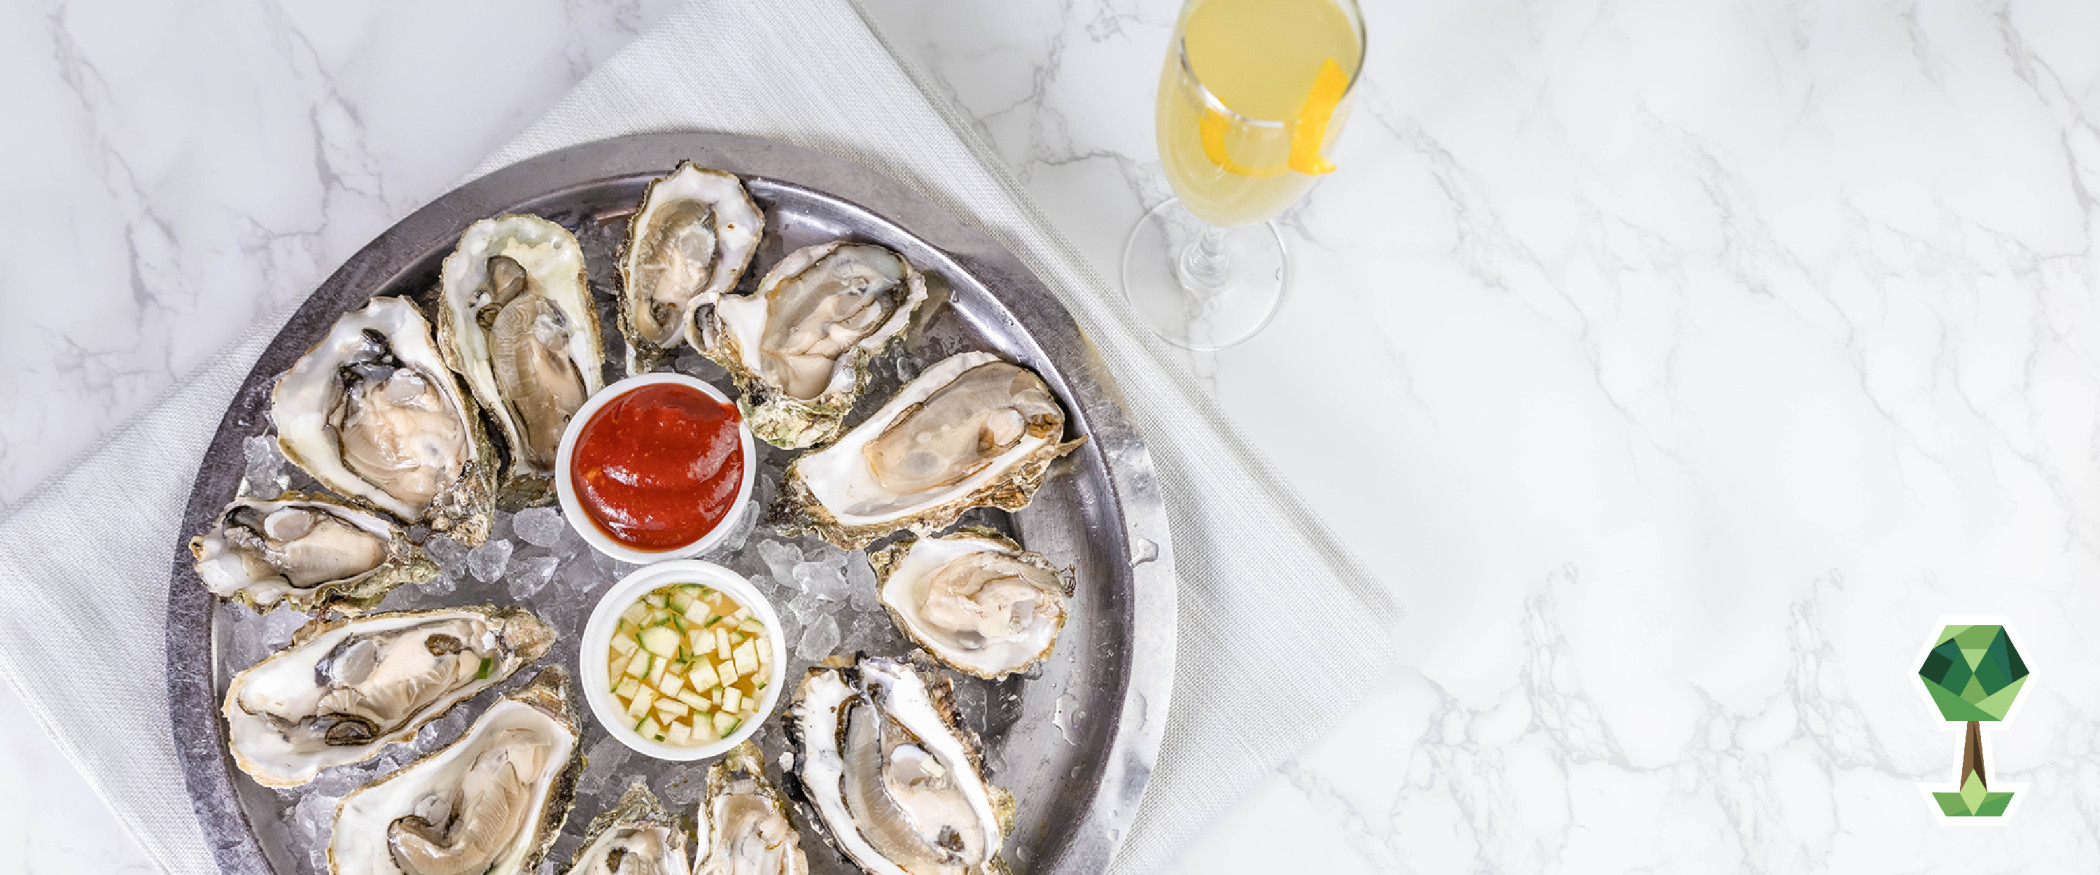 Boise Oyster Bar at Anthony’s is Boise's New Seafood Hotspot